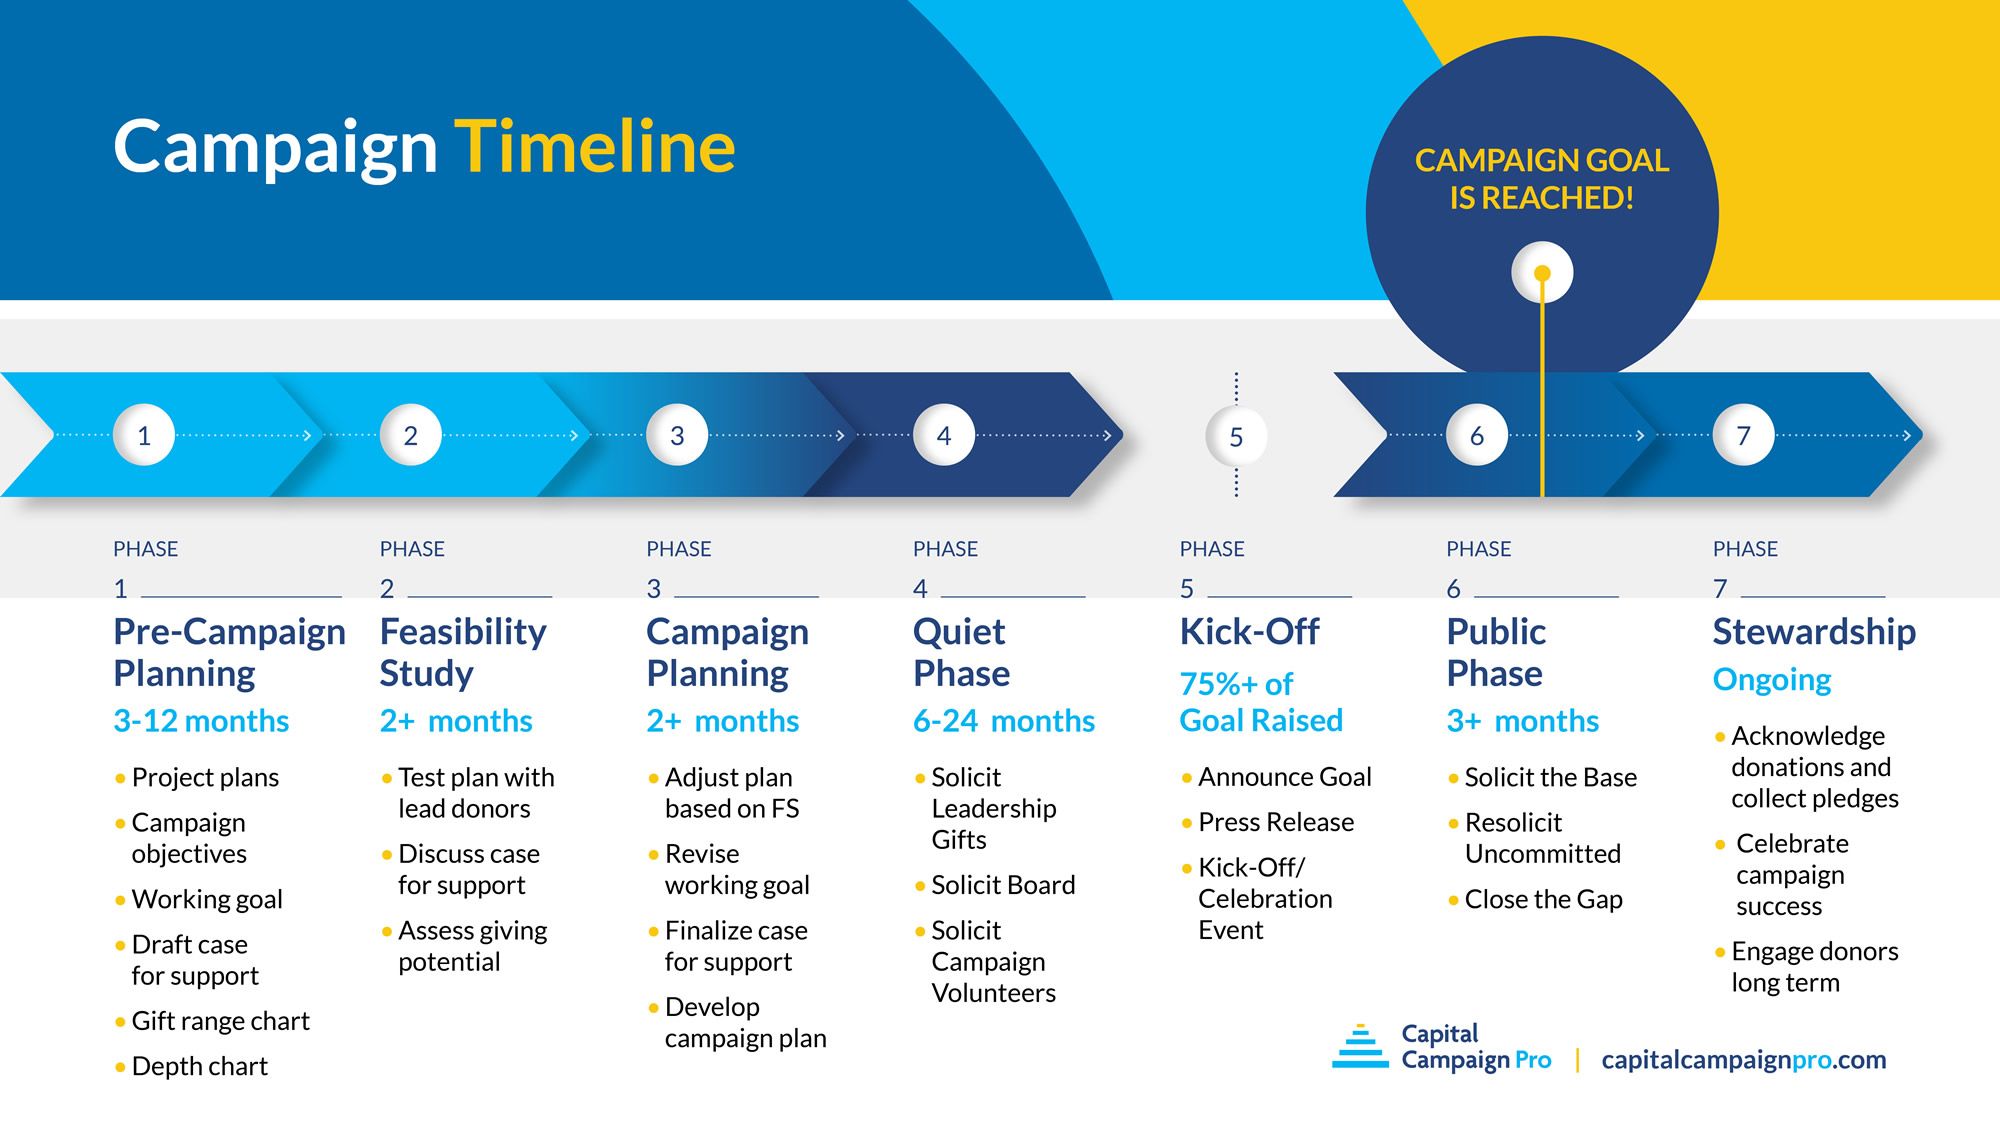 This timeline shows the seven stages of a capital campaign, from pre-campaign planning through stewardship.